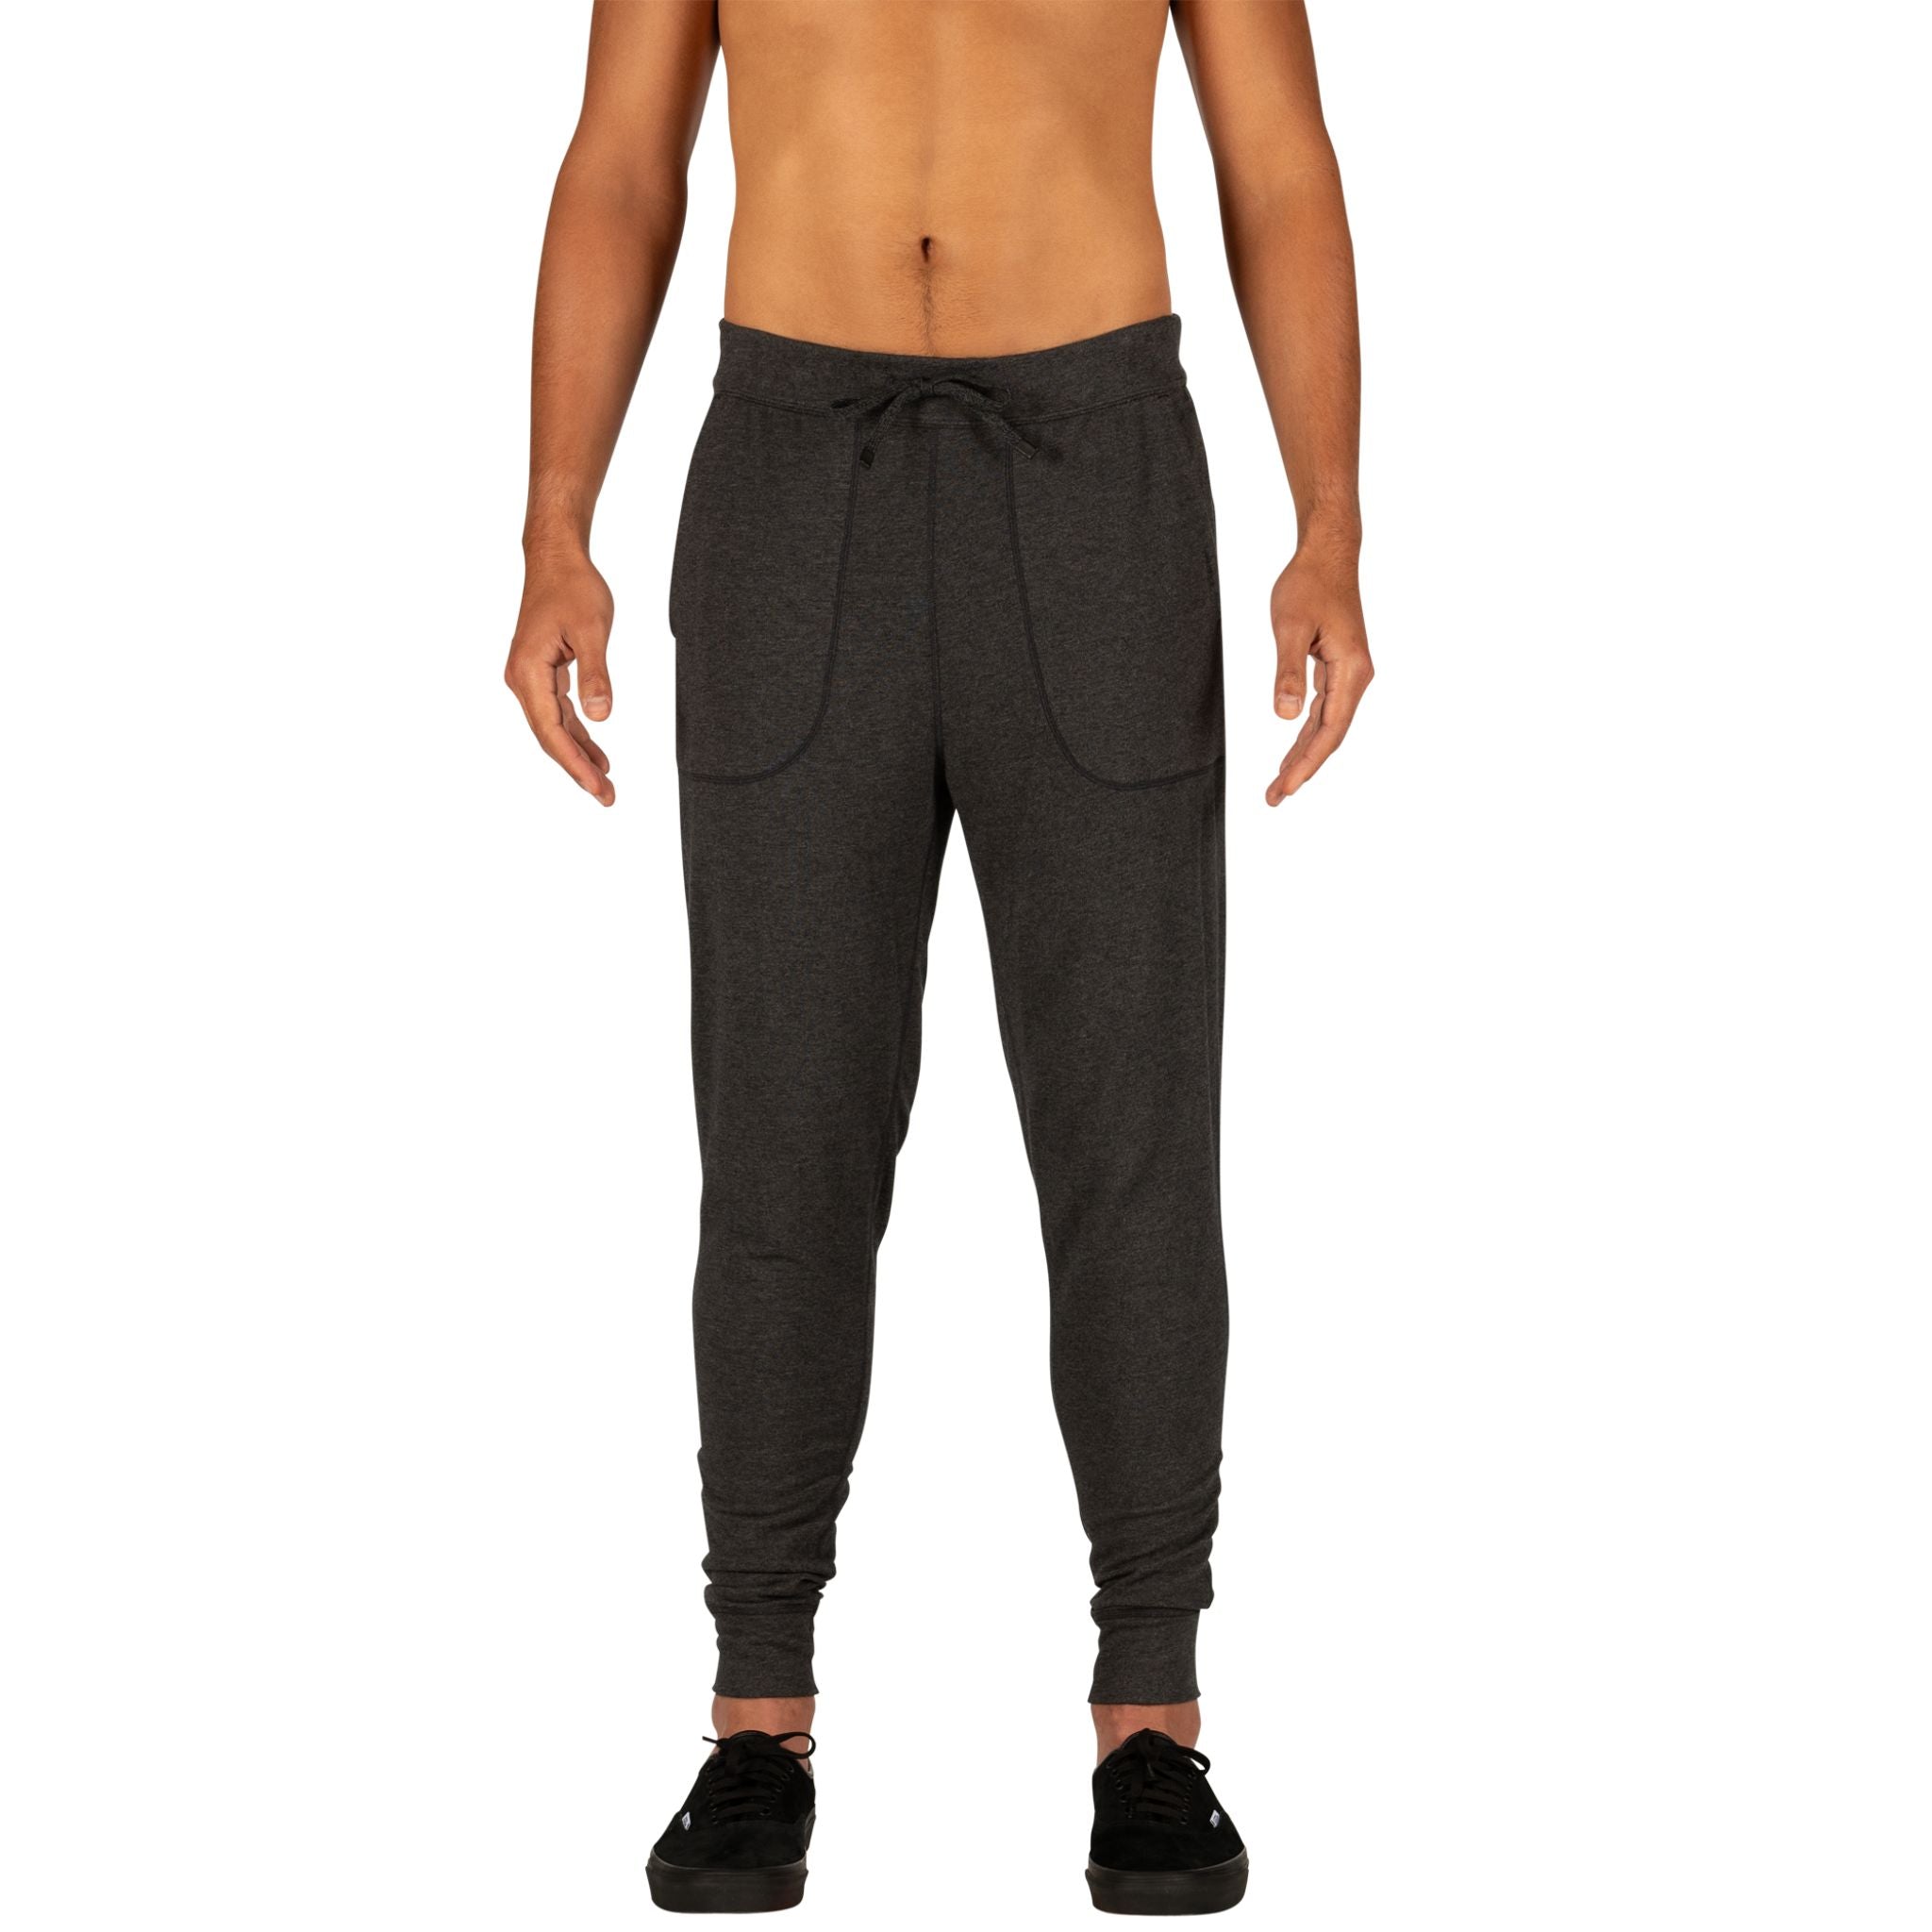 Blending the super-soft hand-feel of premium Modal with the grab-and-go versatility of cotton, SAXX have created a lounge pant like you wouldn’t believe. 3Six Five is here to keep you comfortable no matter what, whether that means going full Netflix binge-mode or taking care of some quick errands outside the house. Featuring non-chafing Flat Out Seams™ for additional comfort, this legendary collection is built for the whole weekend and beyond.